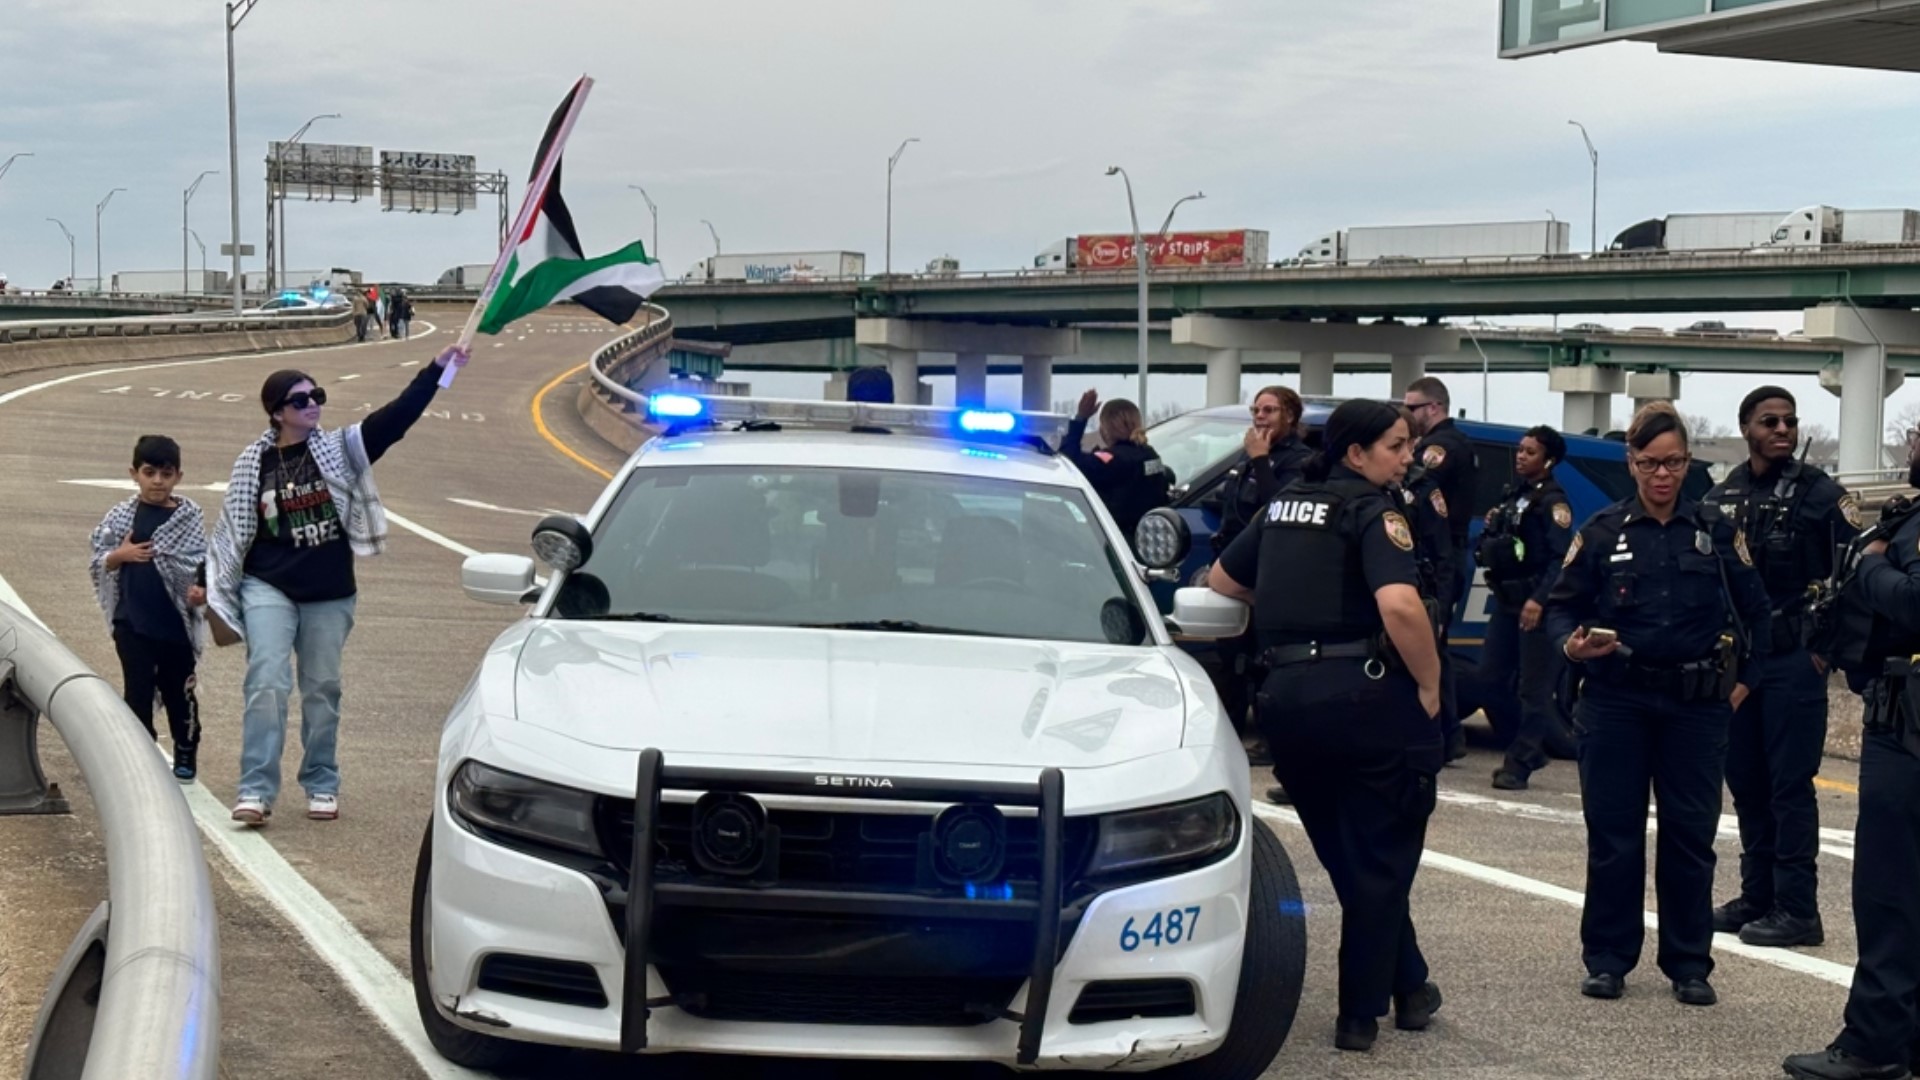 Multiple lanes were blocked on the Memphis-Arkansas I-40 bridge during a pro-Palestinian protest that began at Memphis City Hall on Saturday.